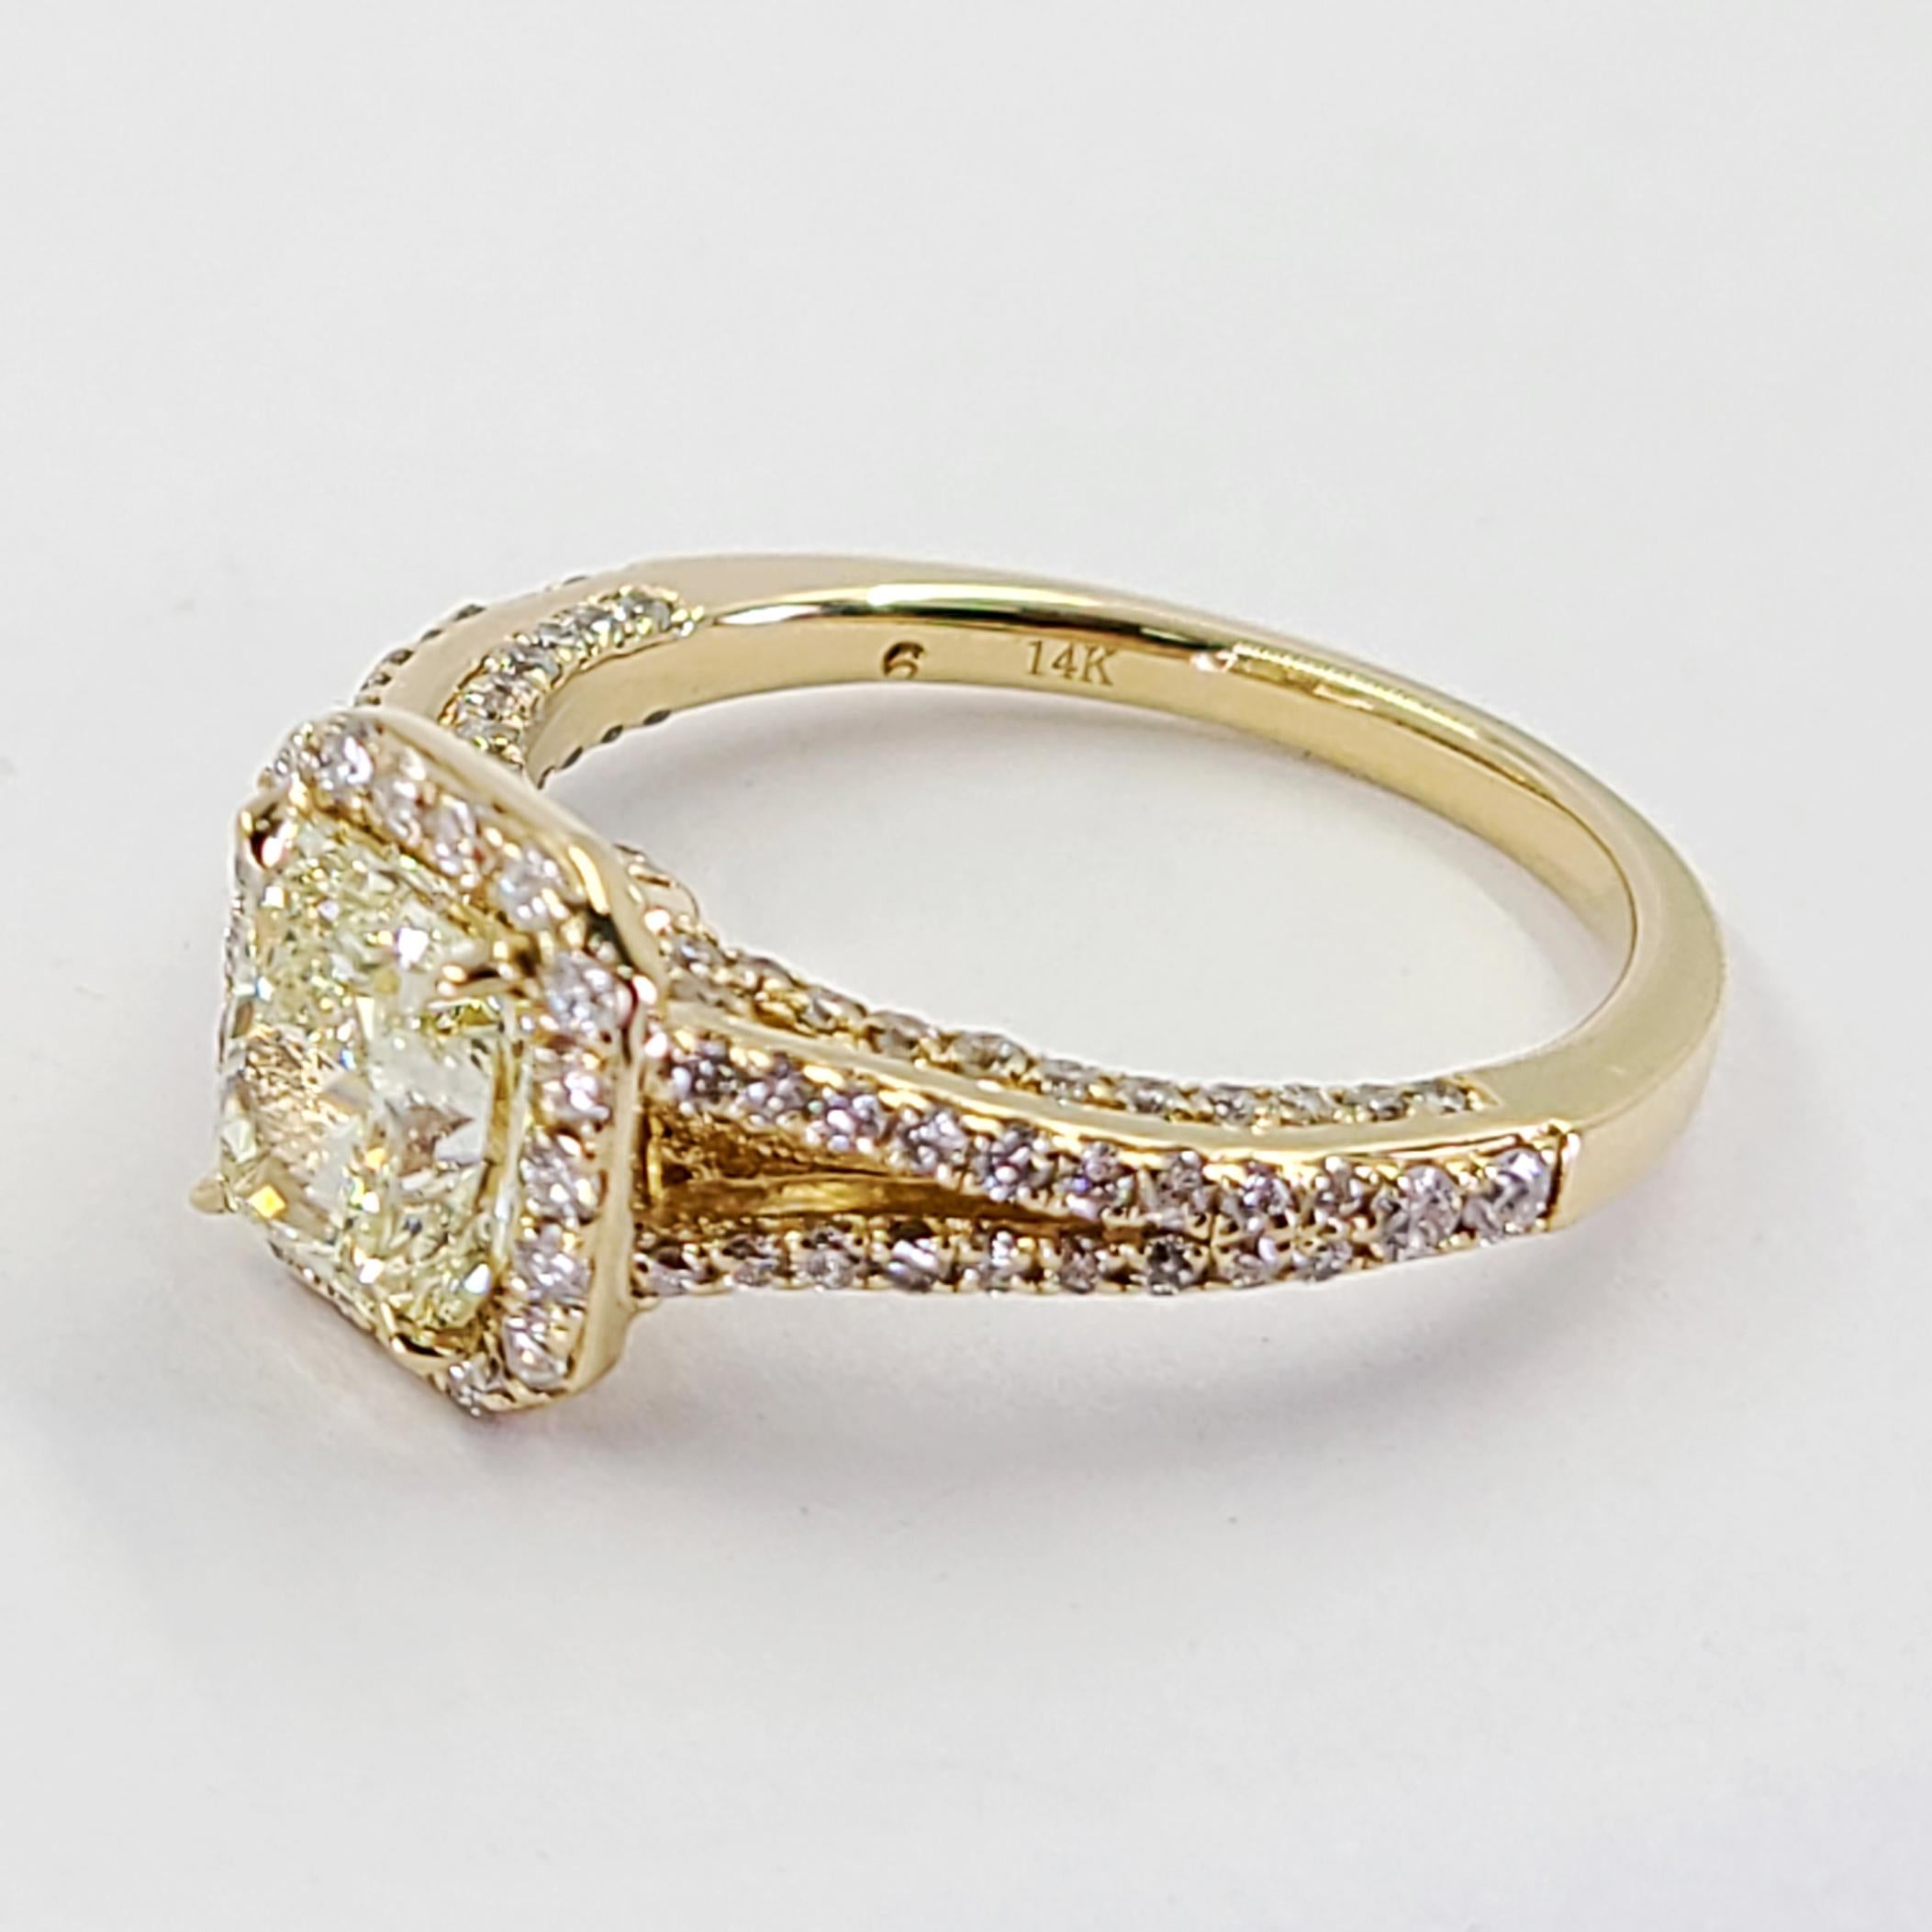 Fancy Light Yellow Radiant Diamond Engagement Ring In Good Condition For Sale In Coral Gables, FL